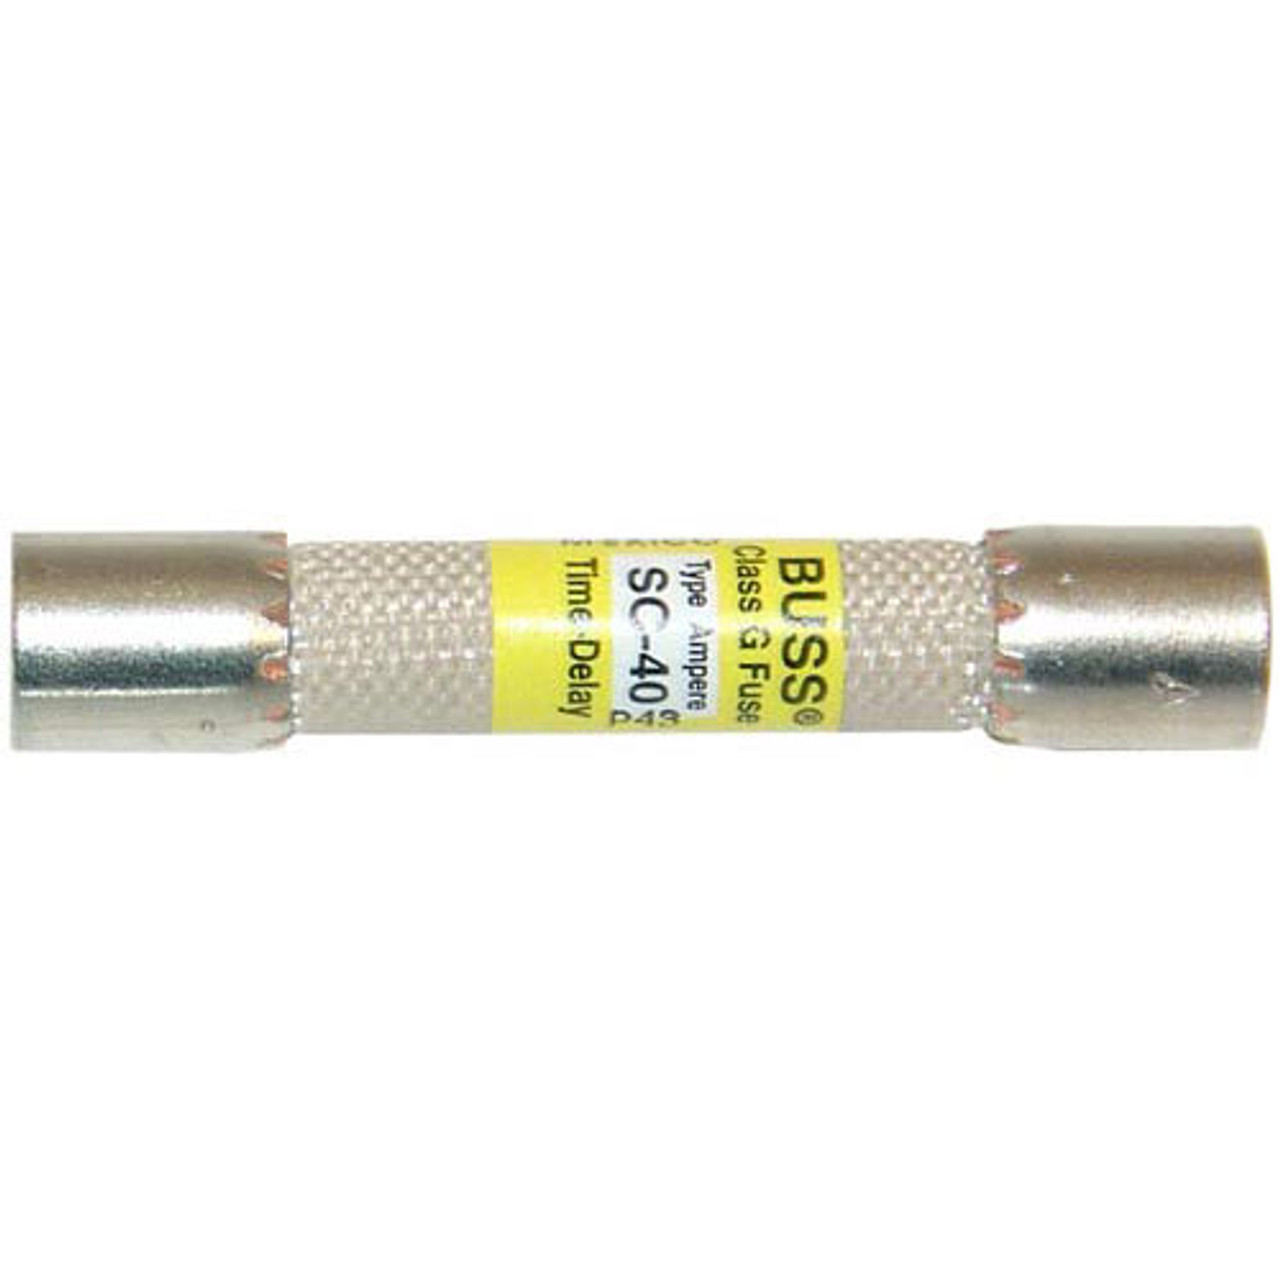 Fuse - Replacement Part For Merco 3841